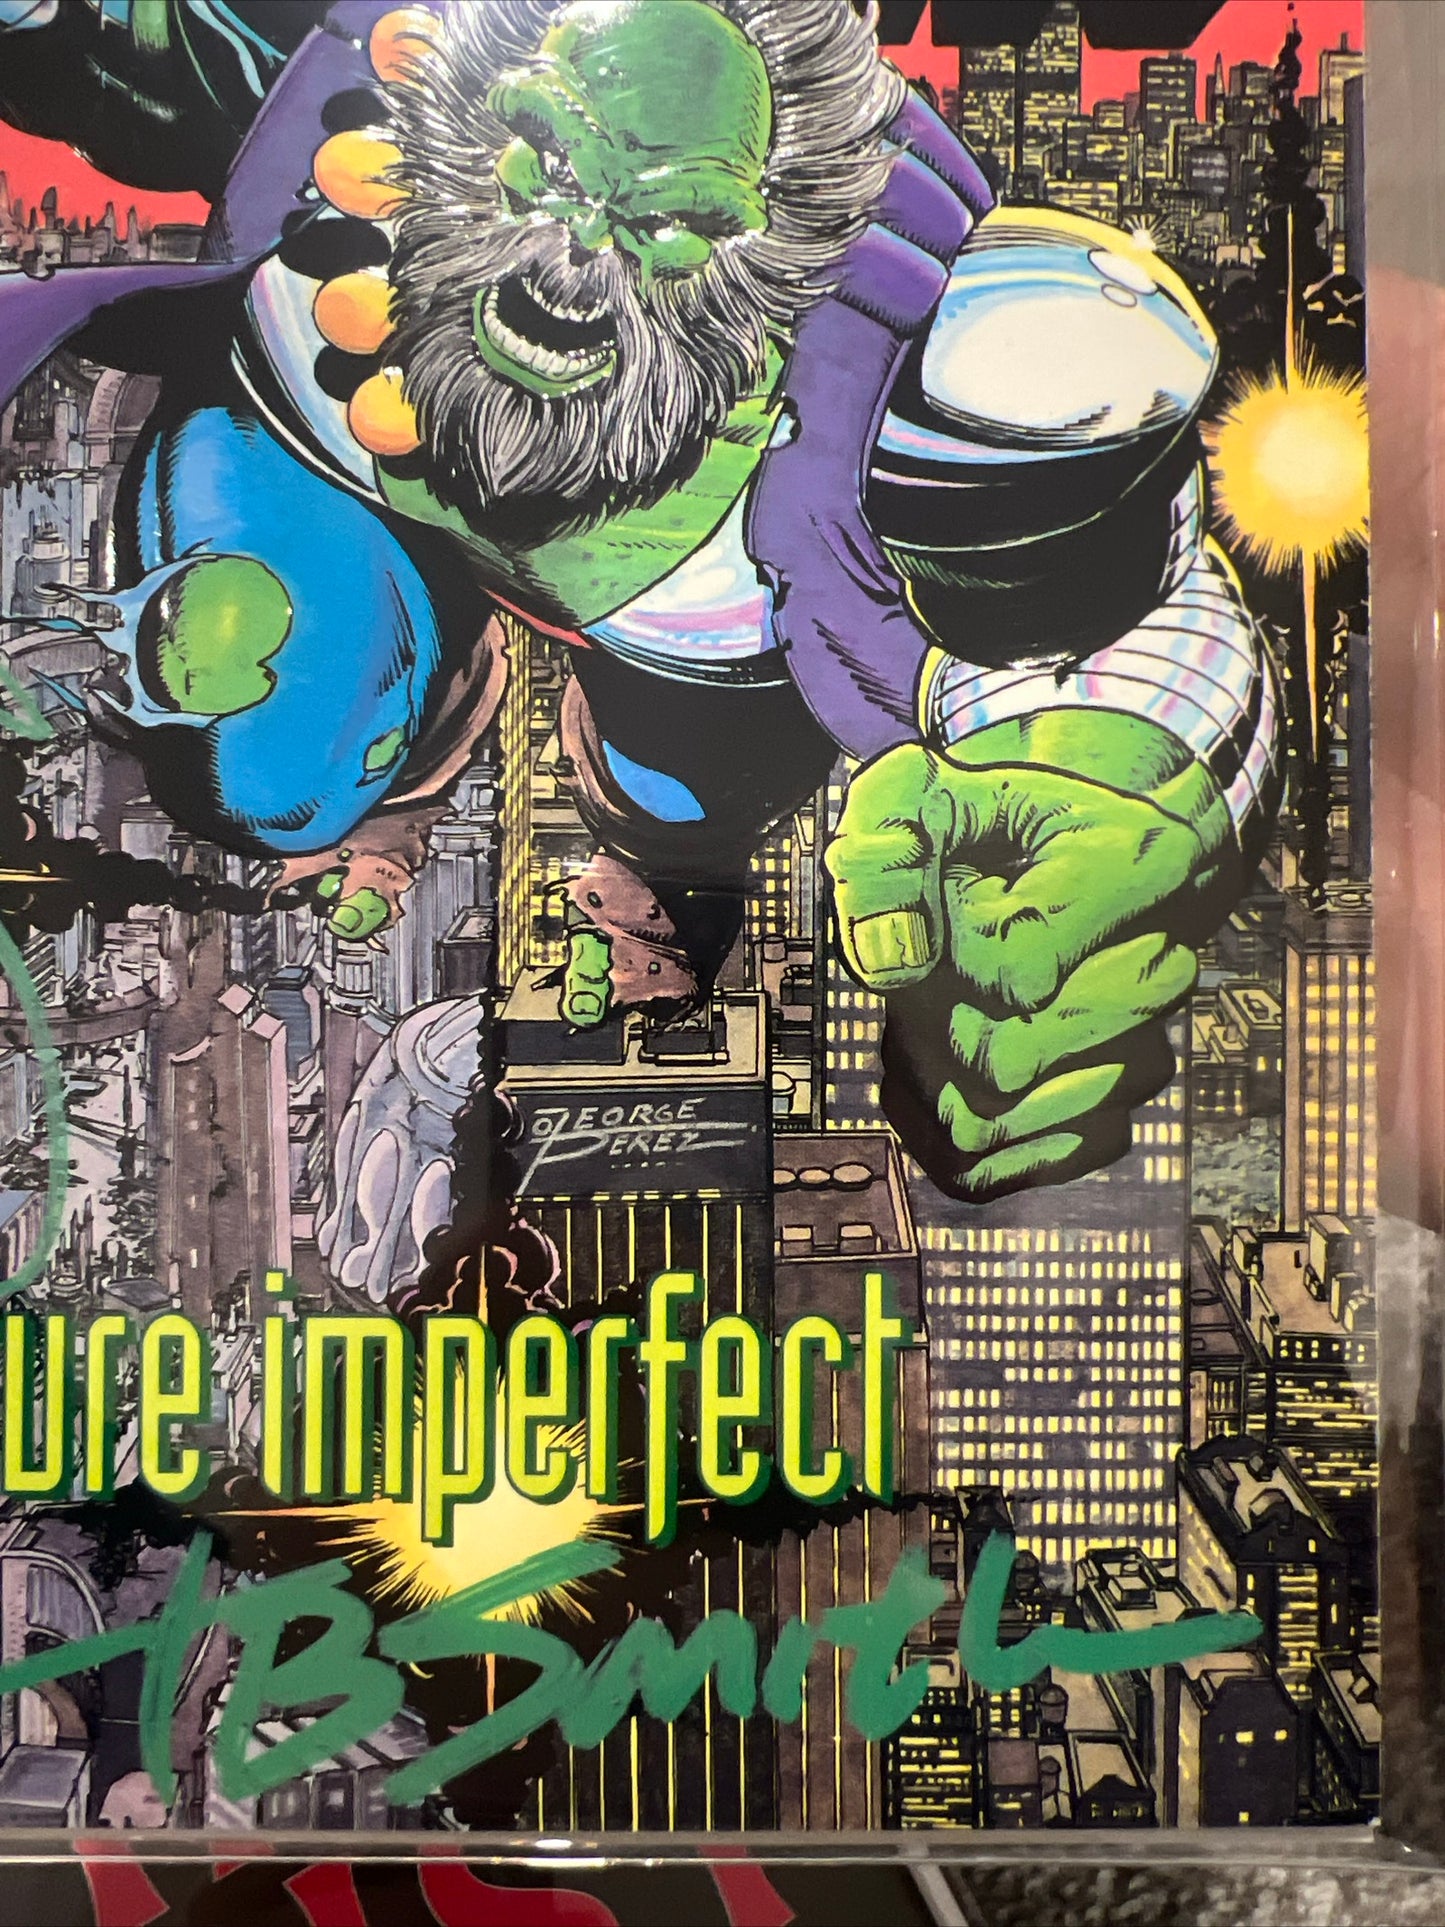 Incredible Hulk: Future Imperfect 1 & 2 Set (Heroes Aren’t Hard To Find) signed by George Perez, Tom Smith and Peter David with COA